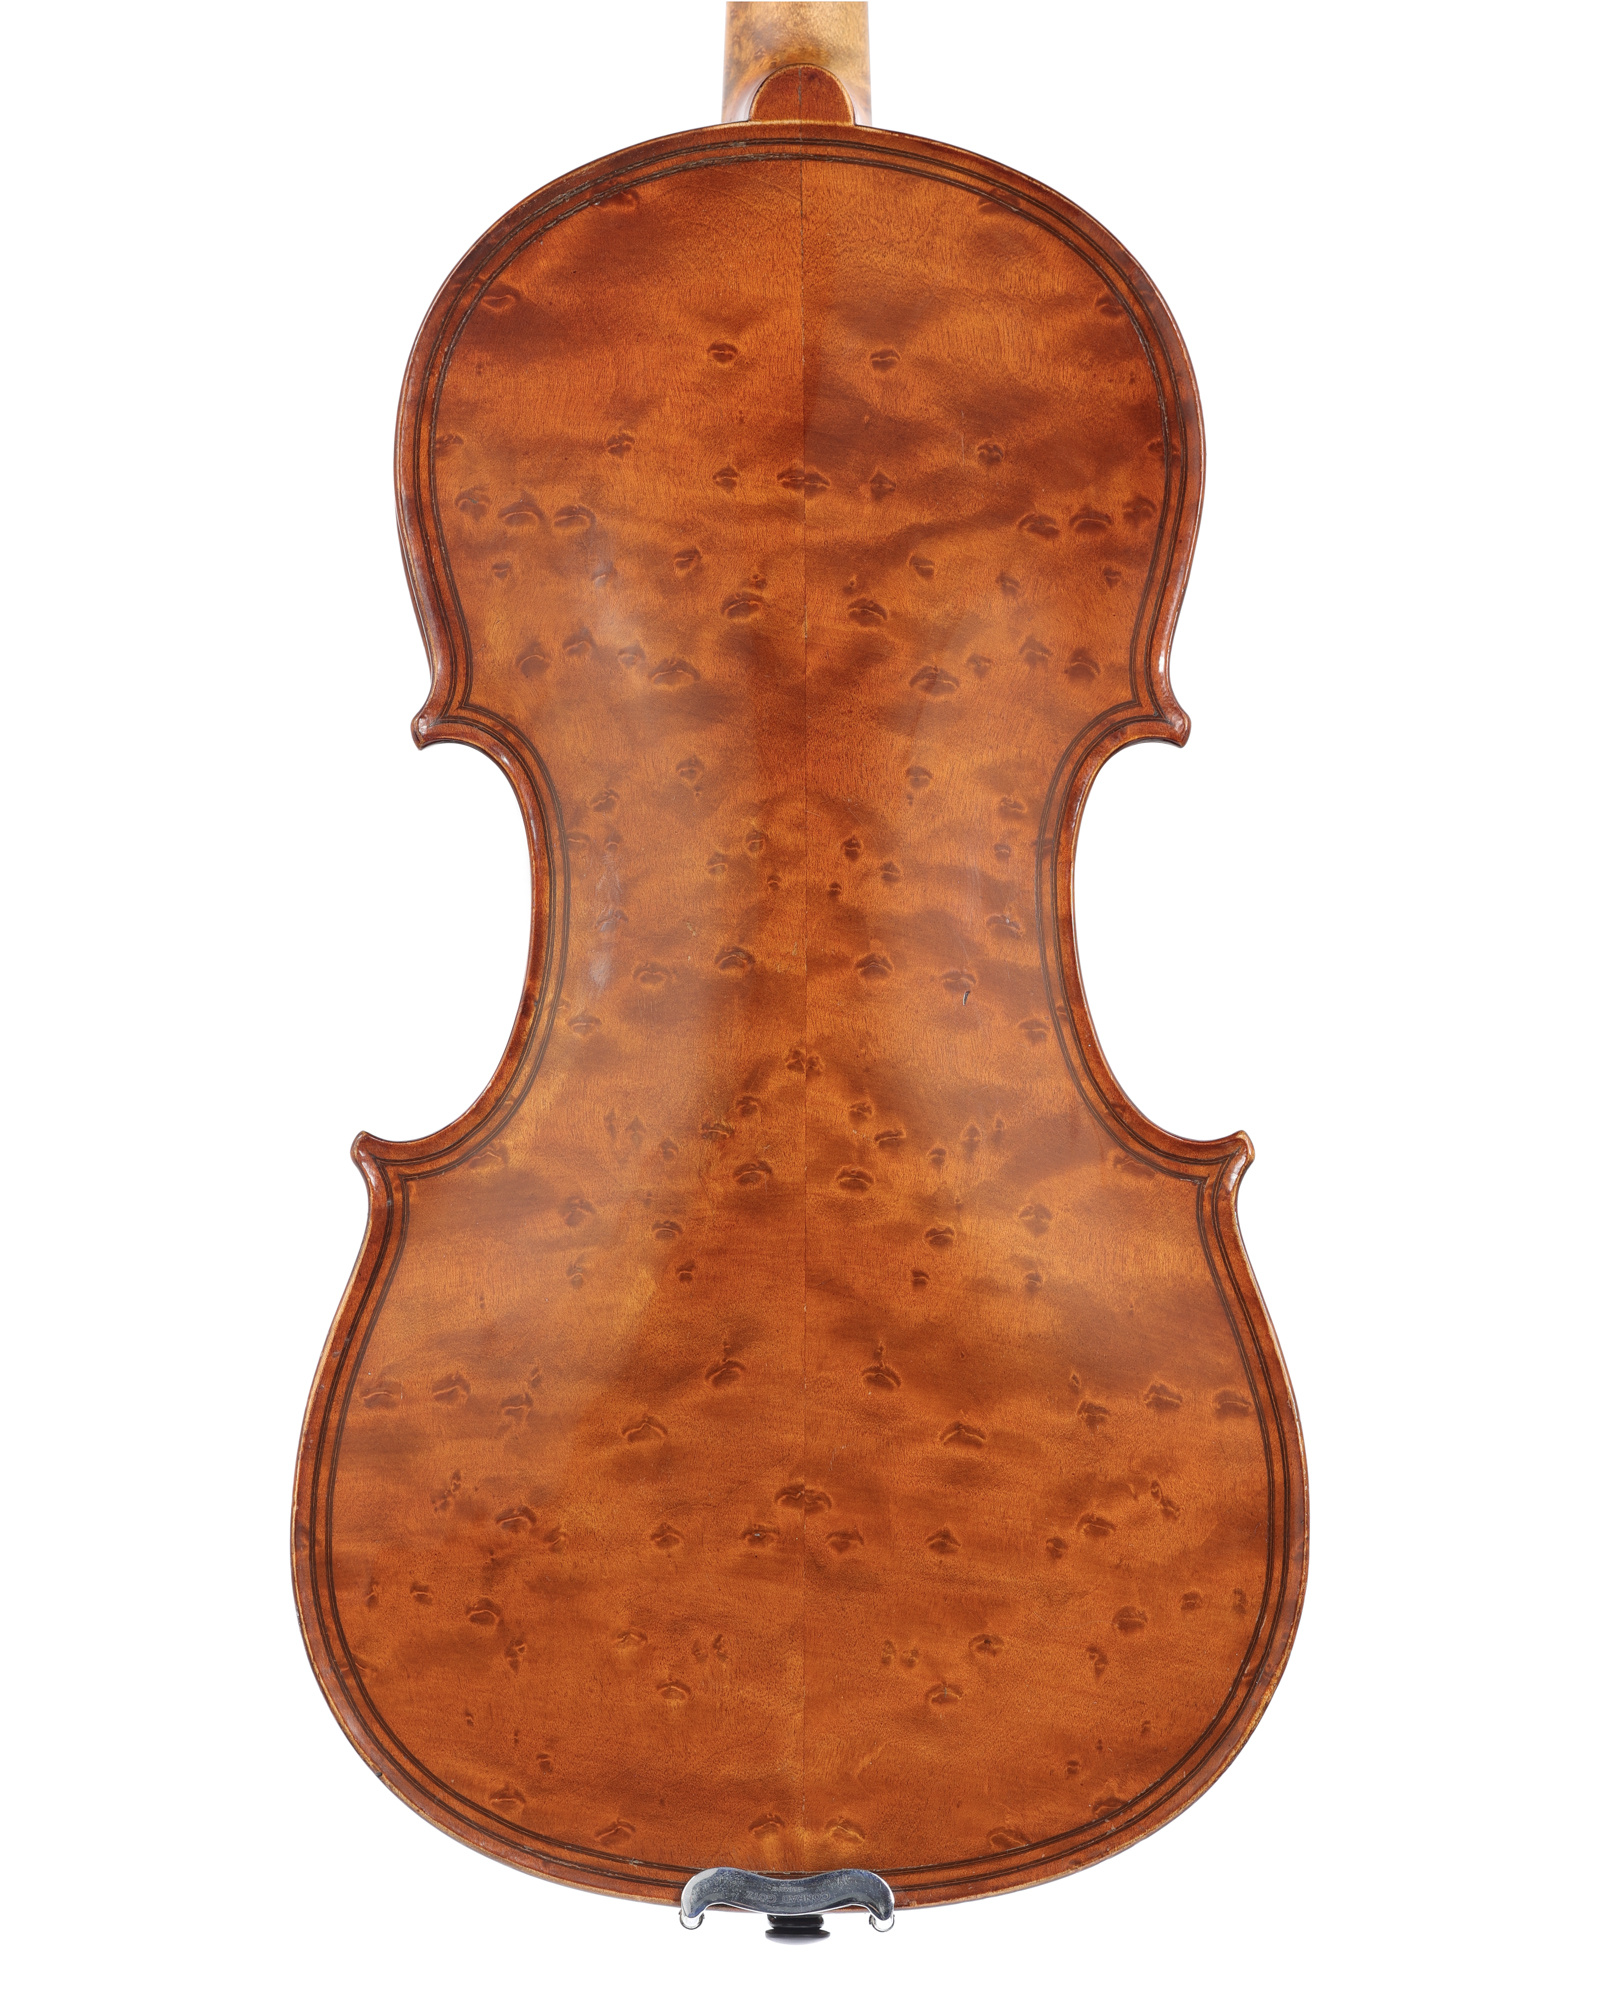 Giovan Paolo Maggini 1624 Brescia" labeled violin with birds-eye repaired, 1920, Germany - Metzler Shop